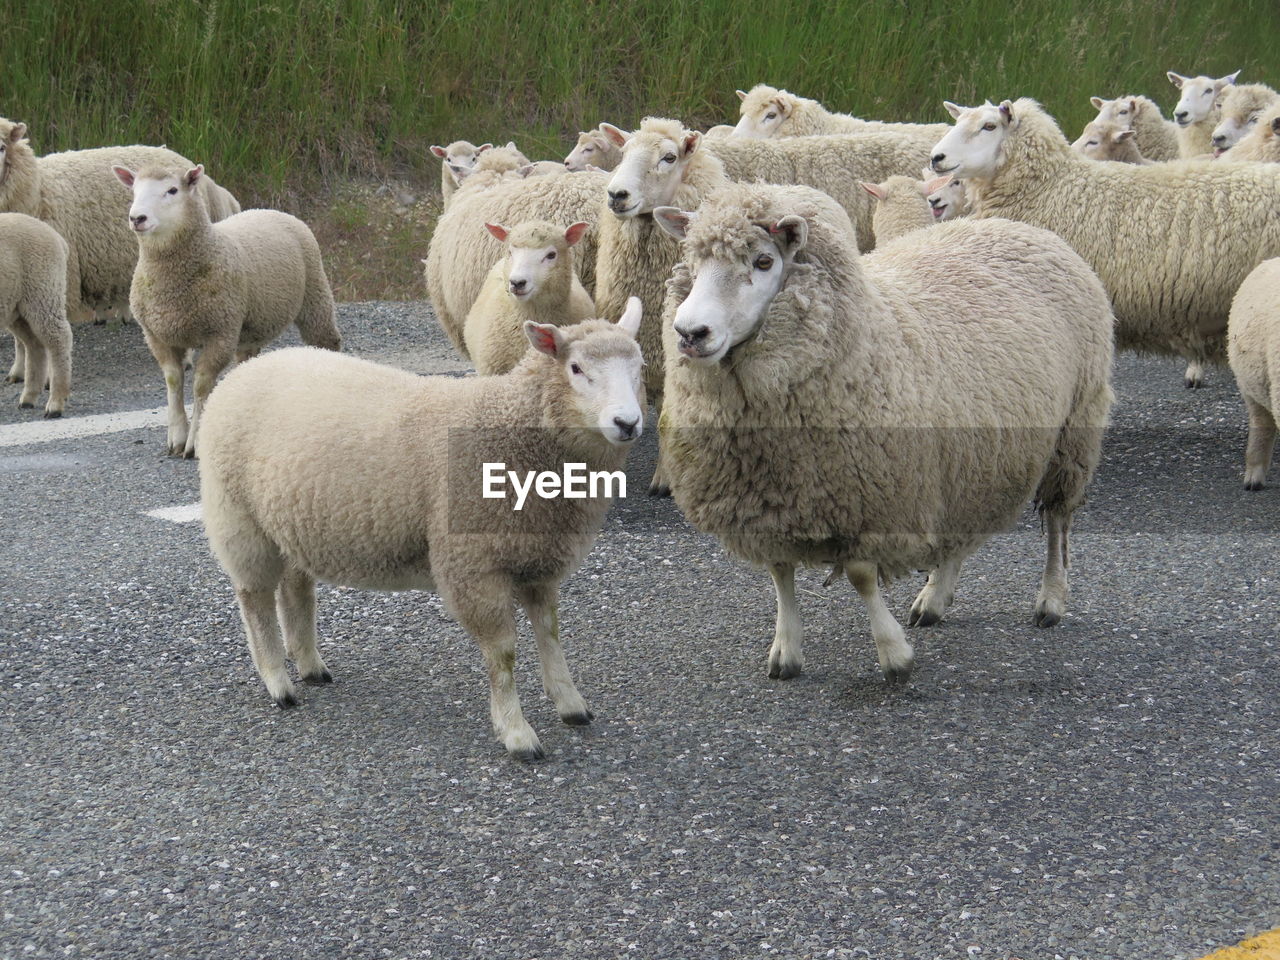 Flock of sheep standing on road